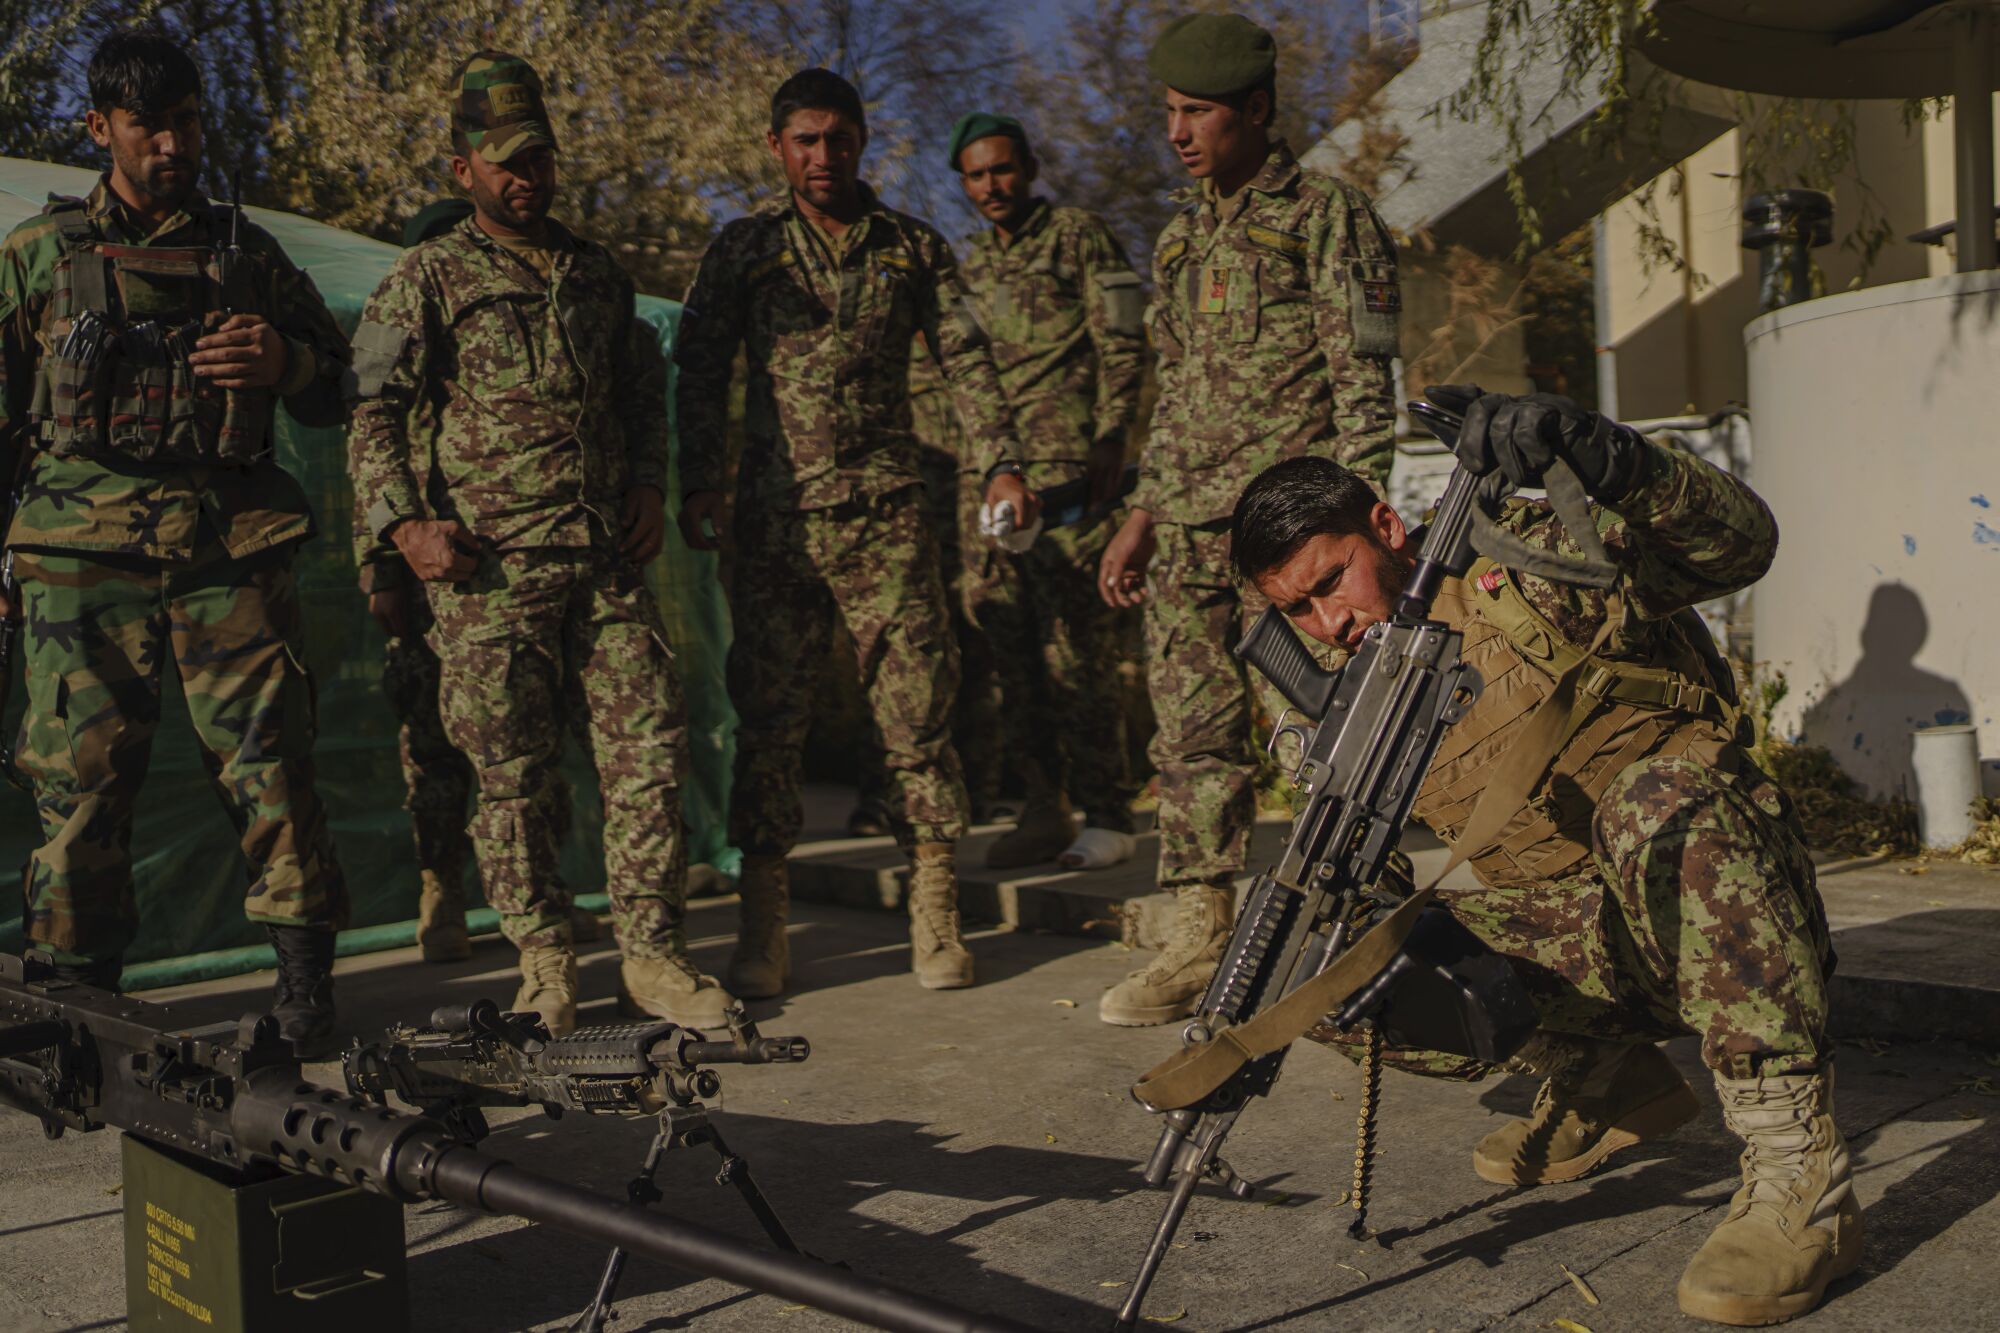 Soldiers inspect and clean their weapons.